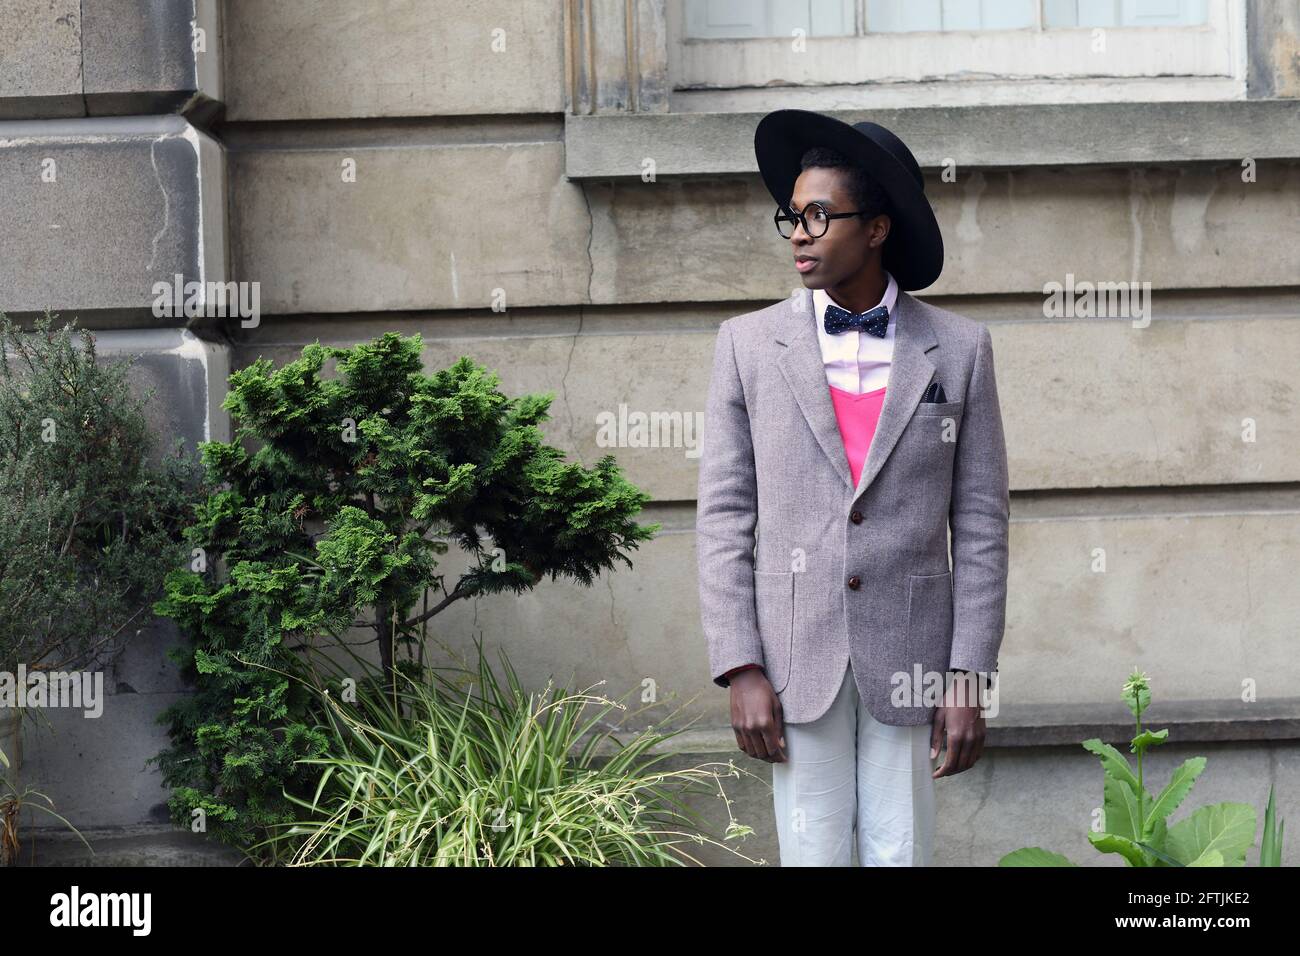 GREAT BRITAIN / England /London /London Fashion Week/Influencer with bow tie Stock Photo